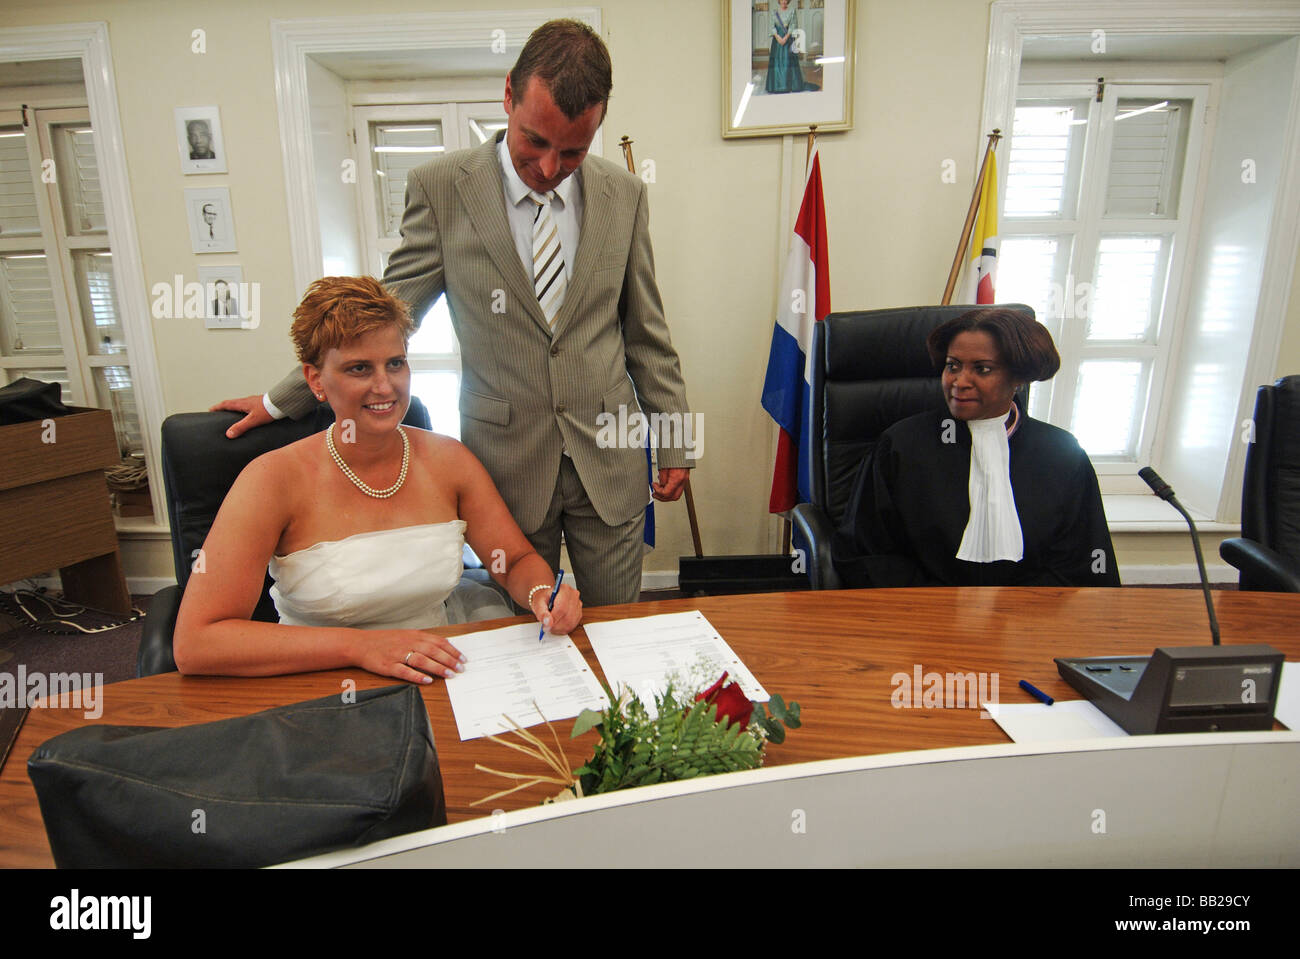 Netherlands Antilles Bonaire Kralendijk wedding ceremony of a Dutch couple in the town hall and government building Stock Photo